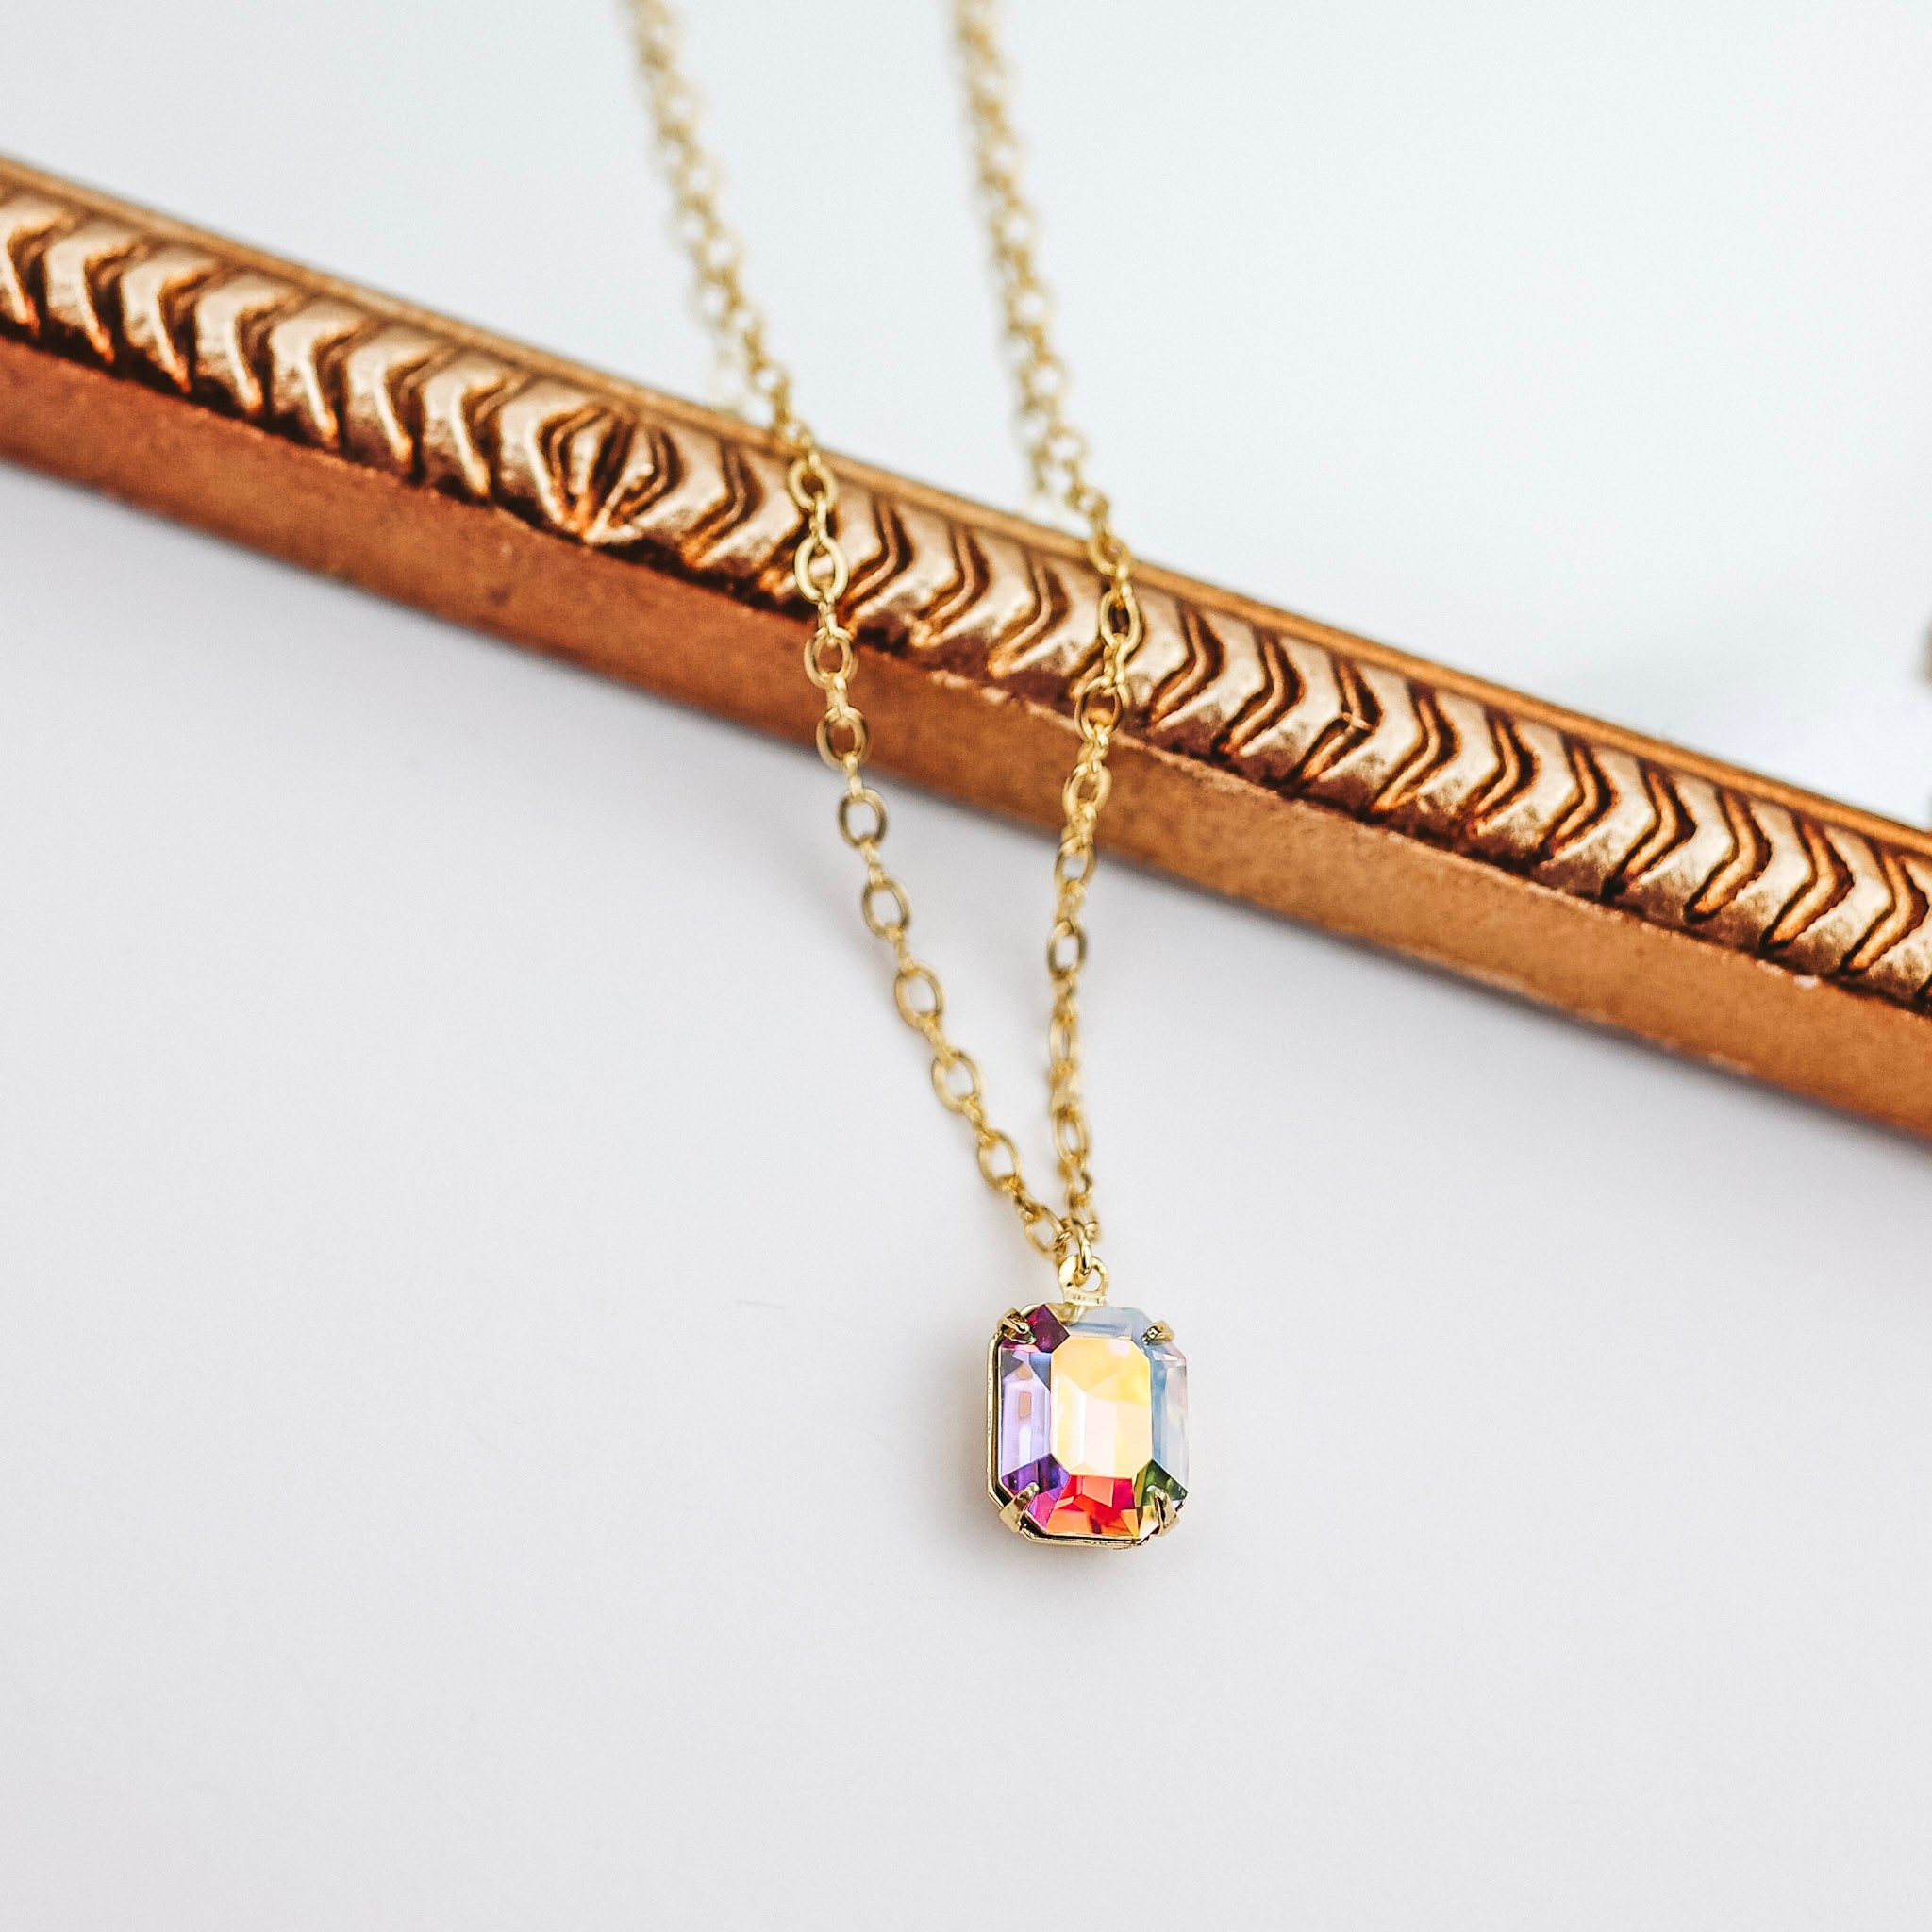 A gold chain necklace with a single colorful crystal pendant that is a square cut. This necklace is pictured on a white background with a mirror.